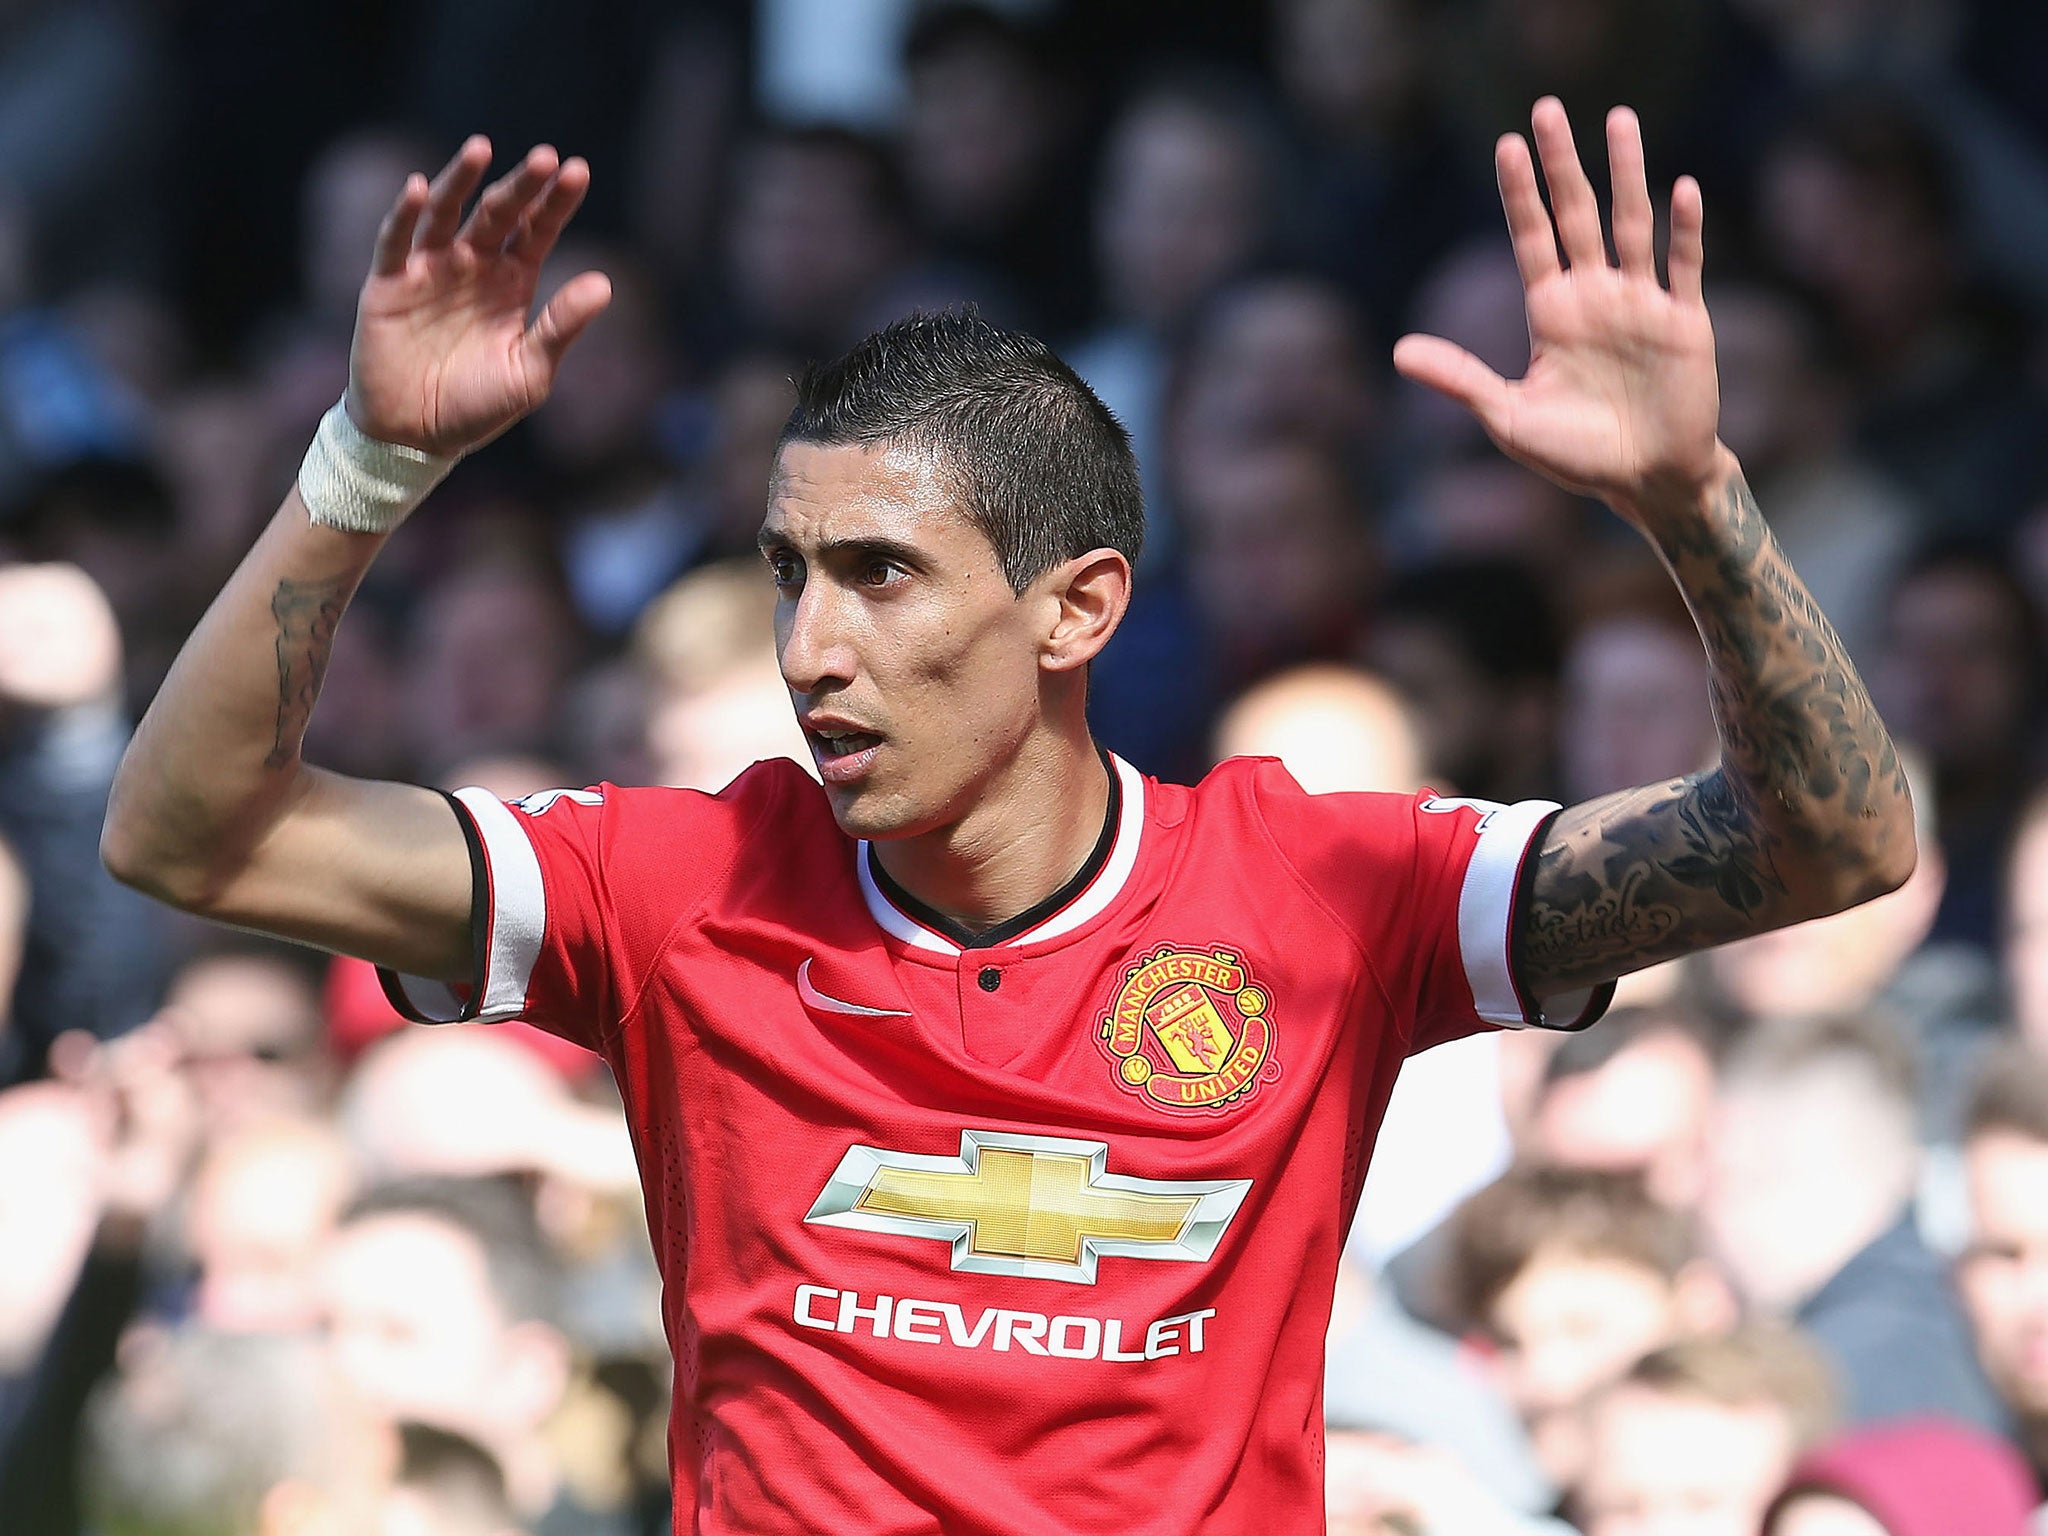 Angel Di Maria gestures during a game for Manchester United